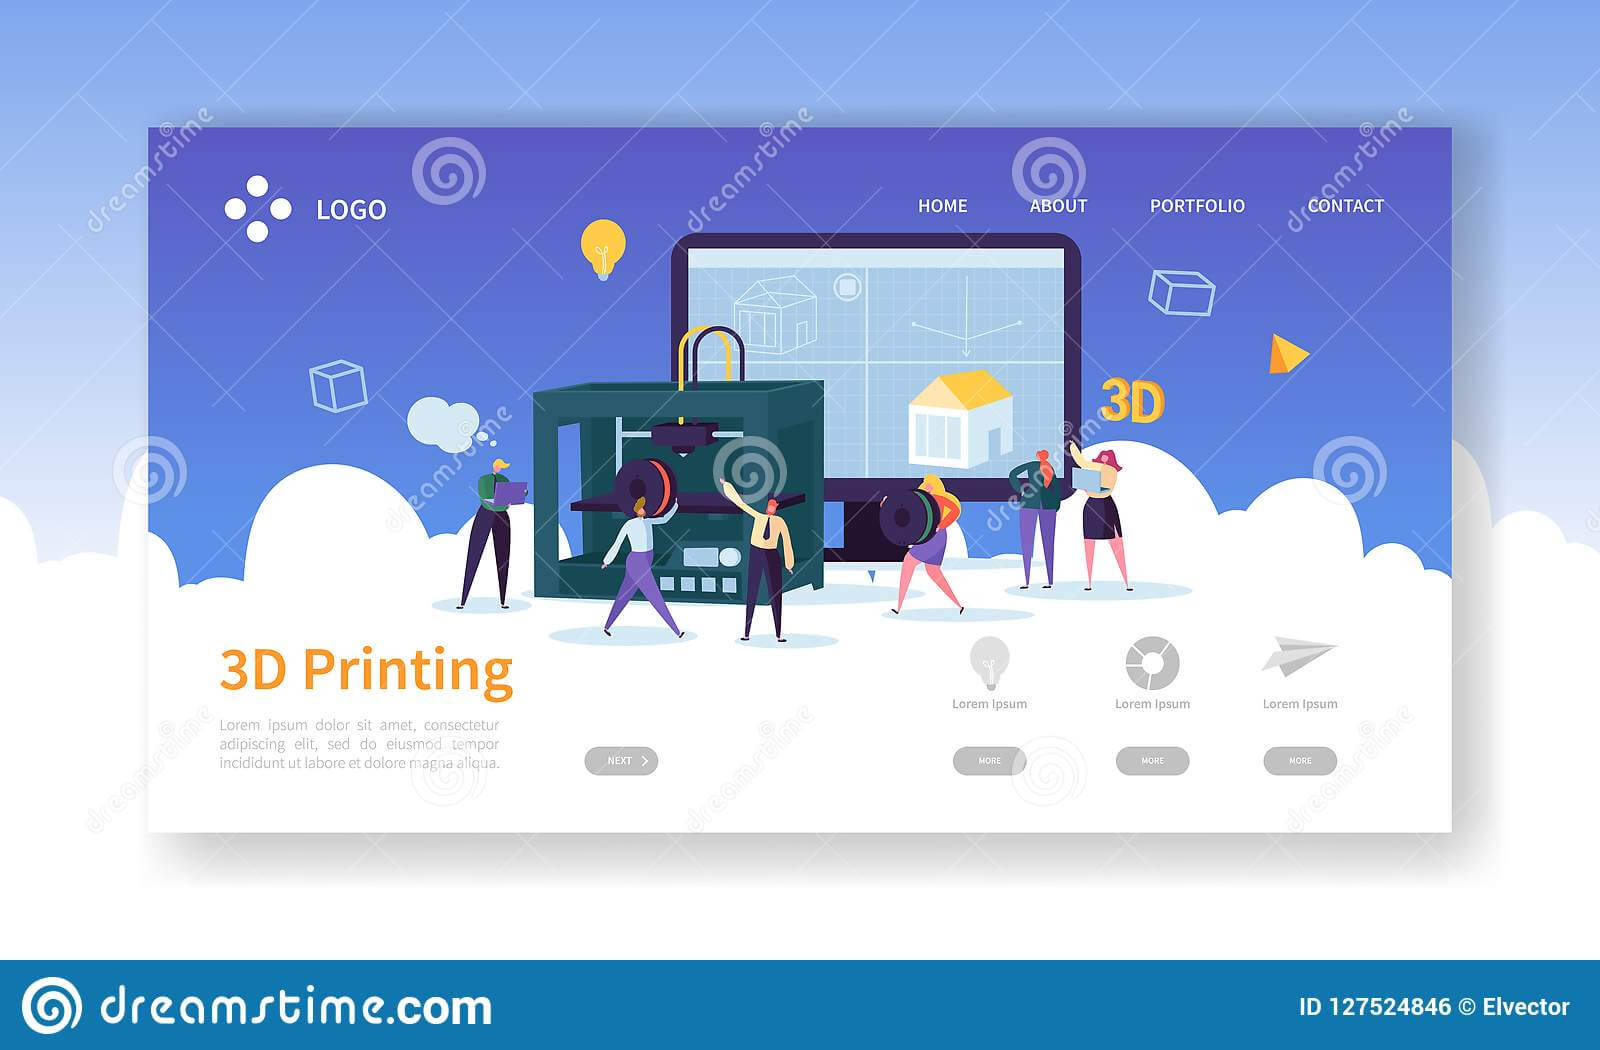 3D Printing Technology Landing Page. 3D Printer Equipment With 3D Printer Templates